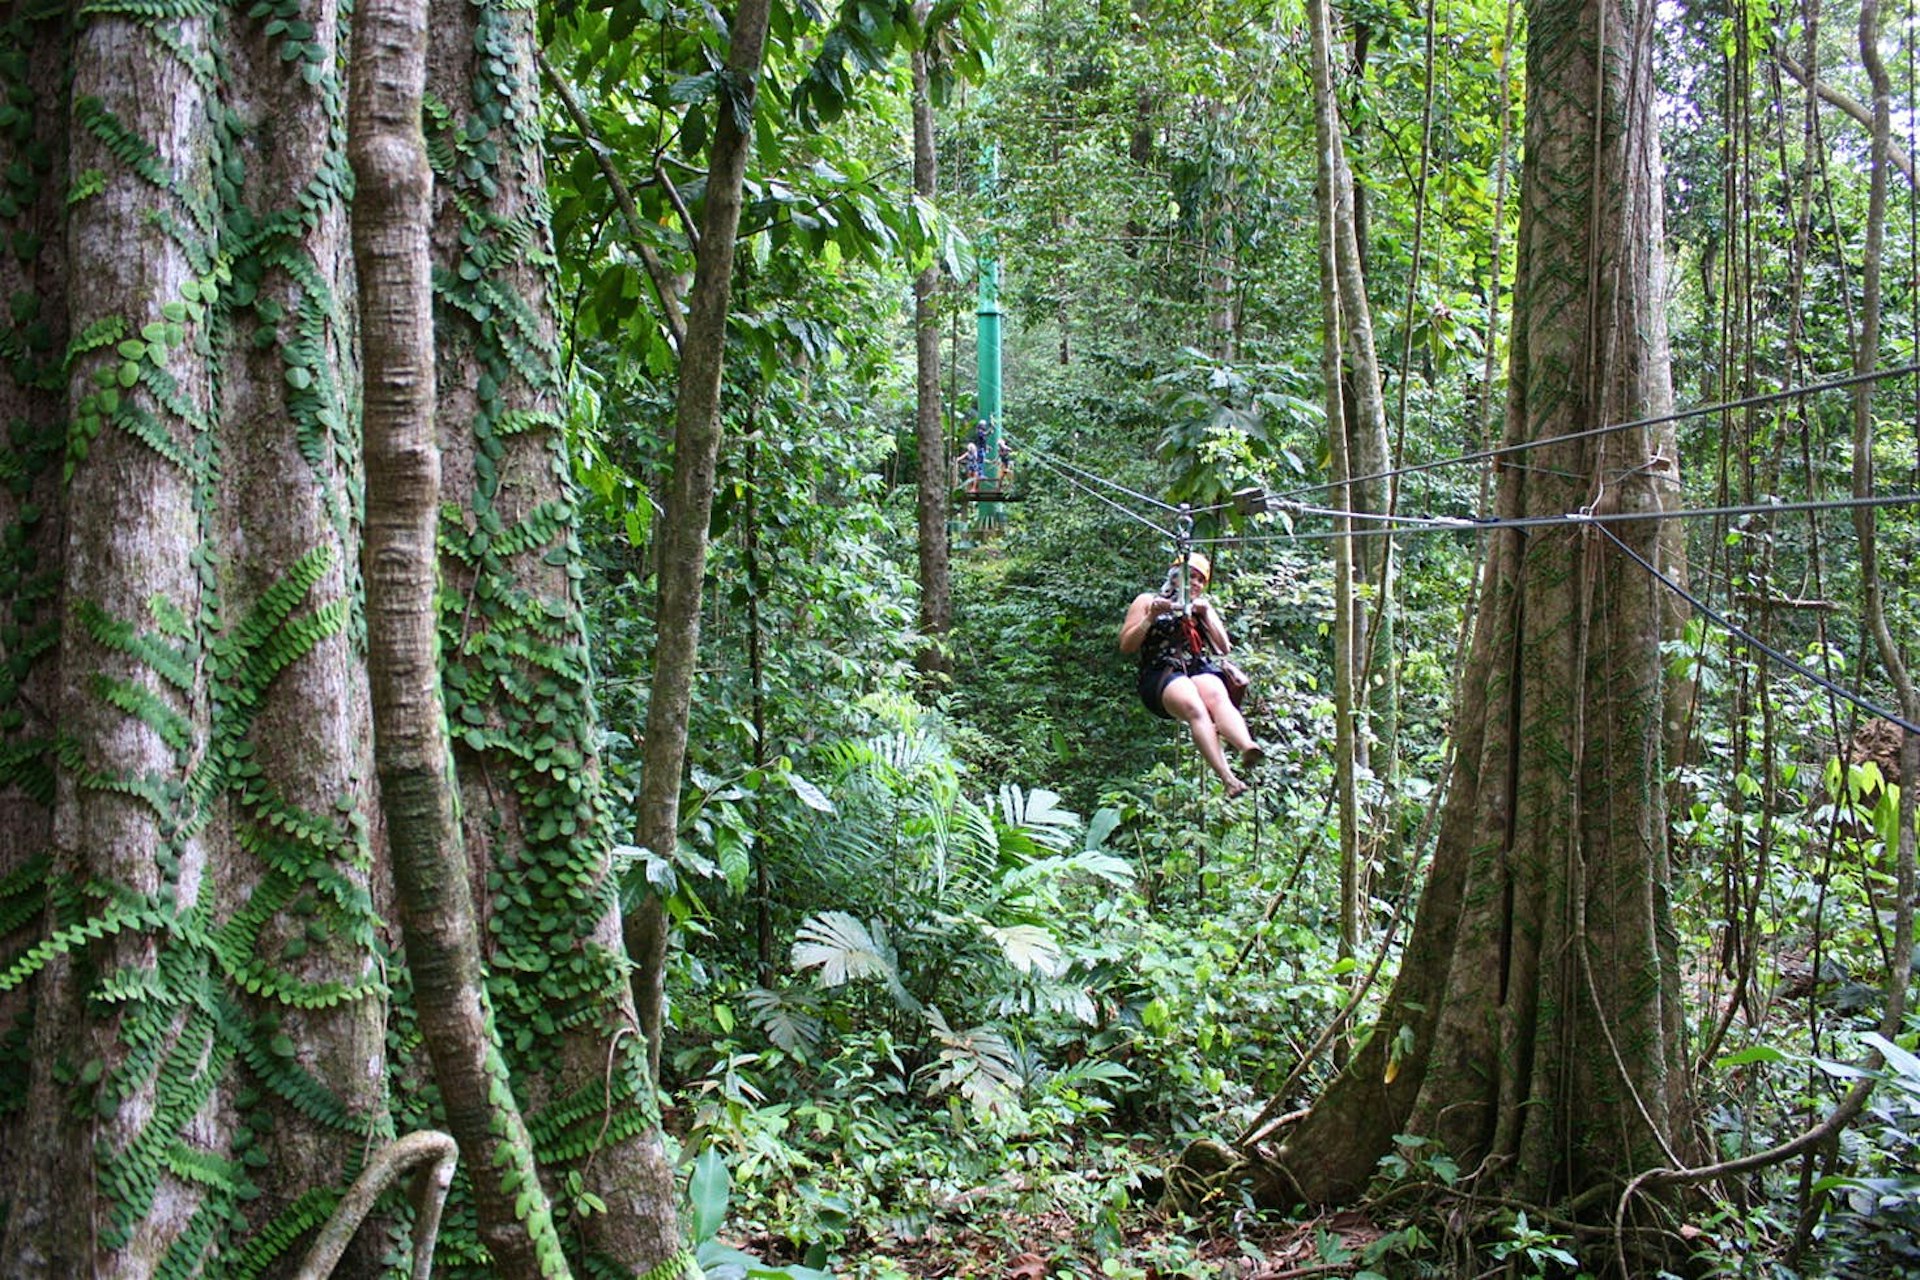 Brushing shoulders with the rainforest canopy: only on a zipline © Lorna Parkes / Lonely Planet